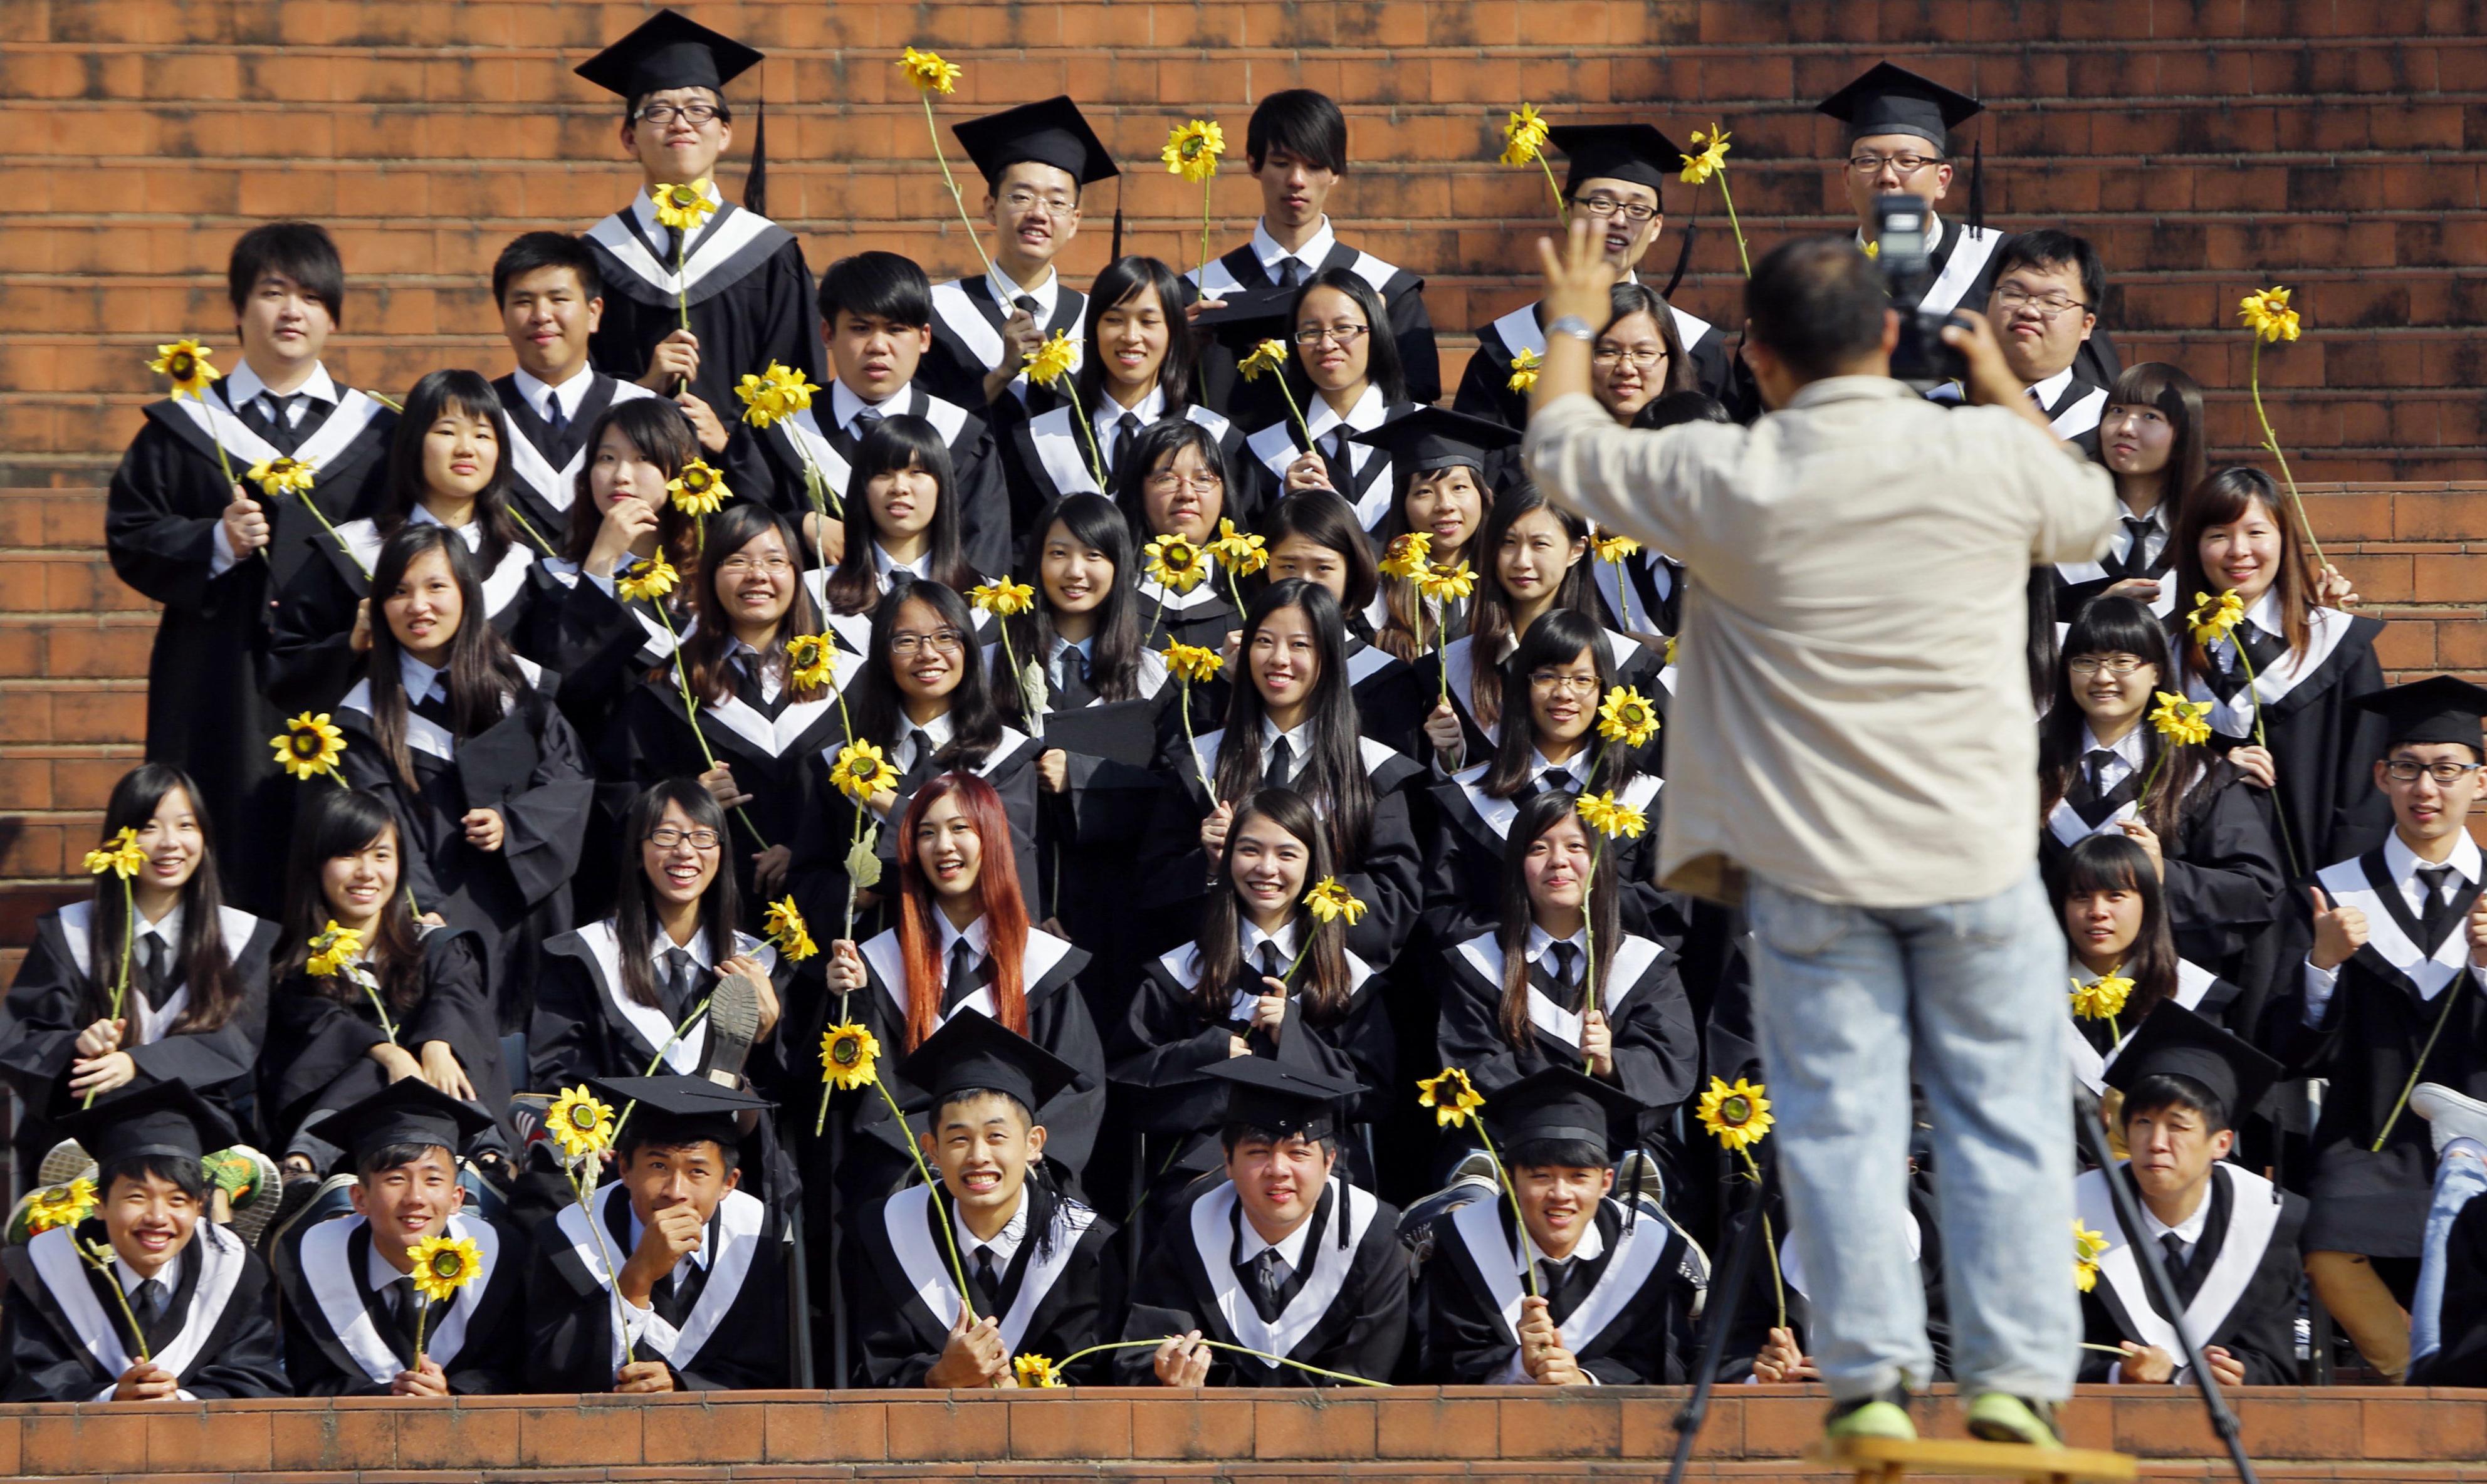 A group of students from the National Chiayi University in Chiayi City, southwestern Taiwan, poses for a class photo on campus on Dec. 8, 2014. (Kazuhiko Yamashita—Kyodo)